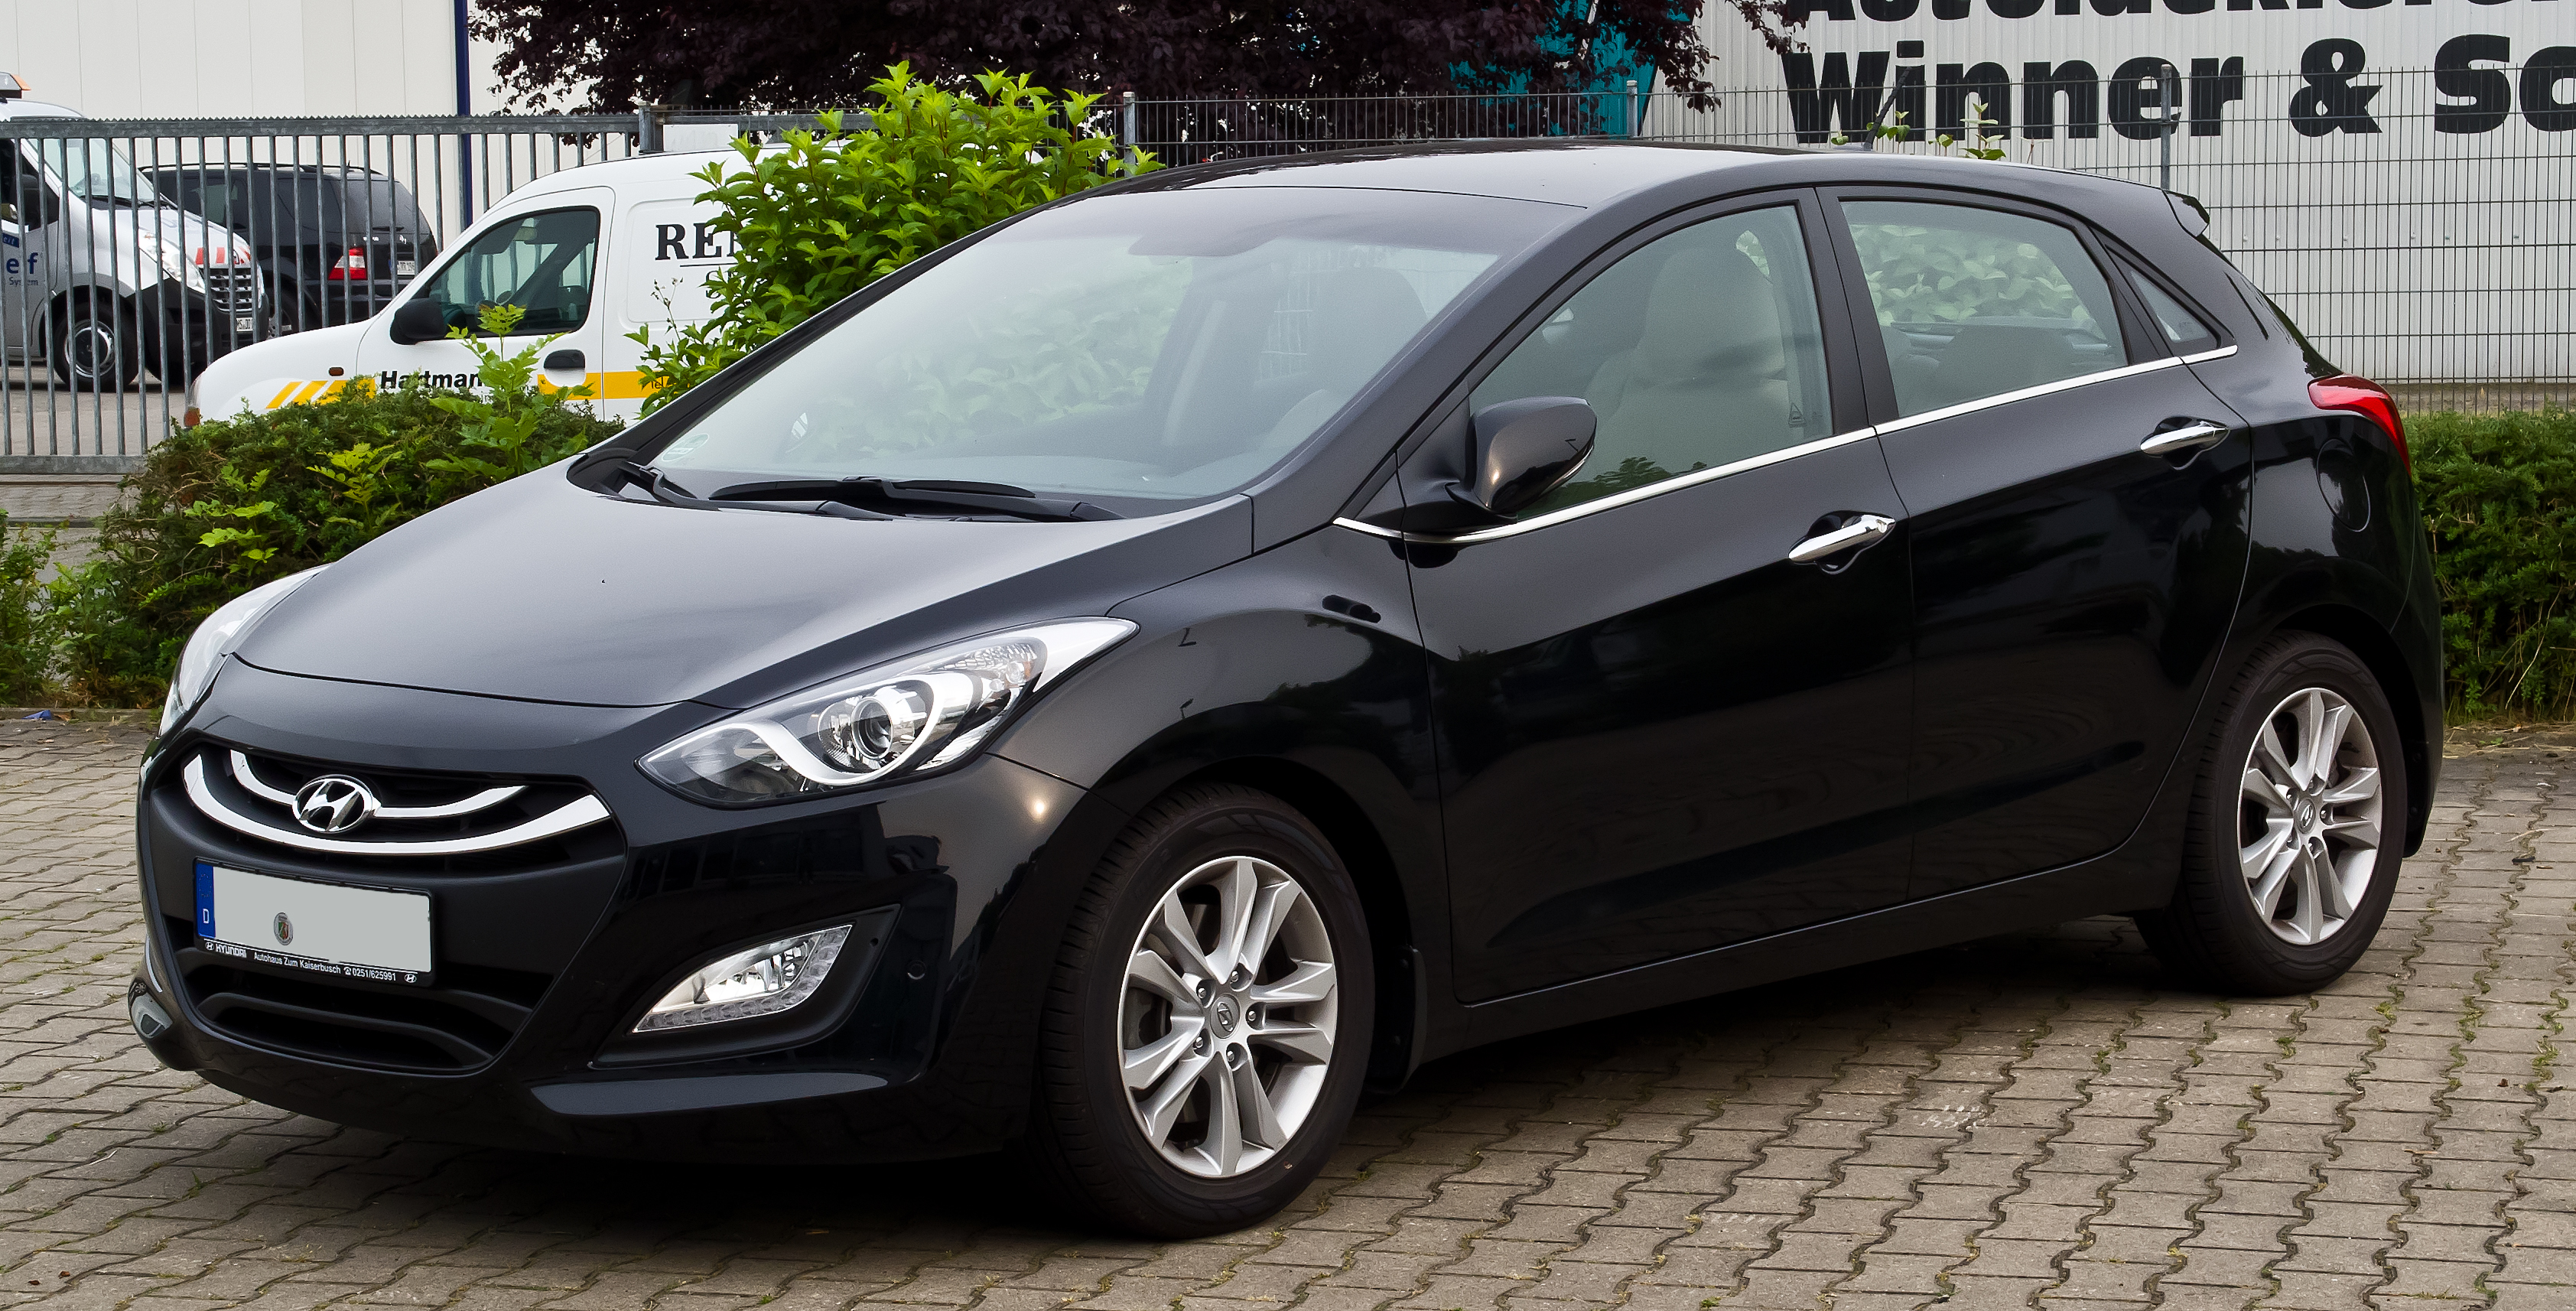 Hyundai I30 I Restyling 10 12 Station Wagon 5 Door Outstanding Cars